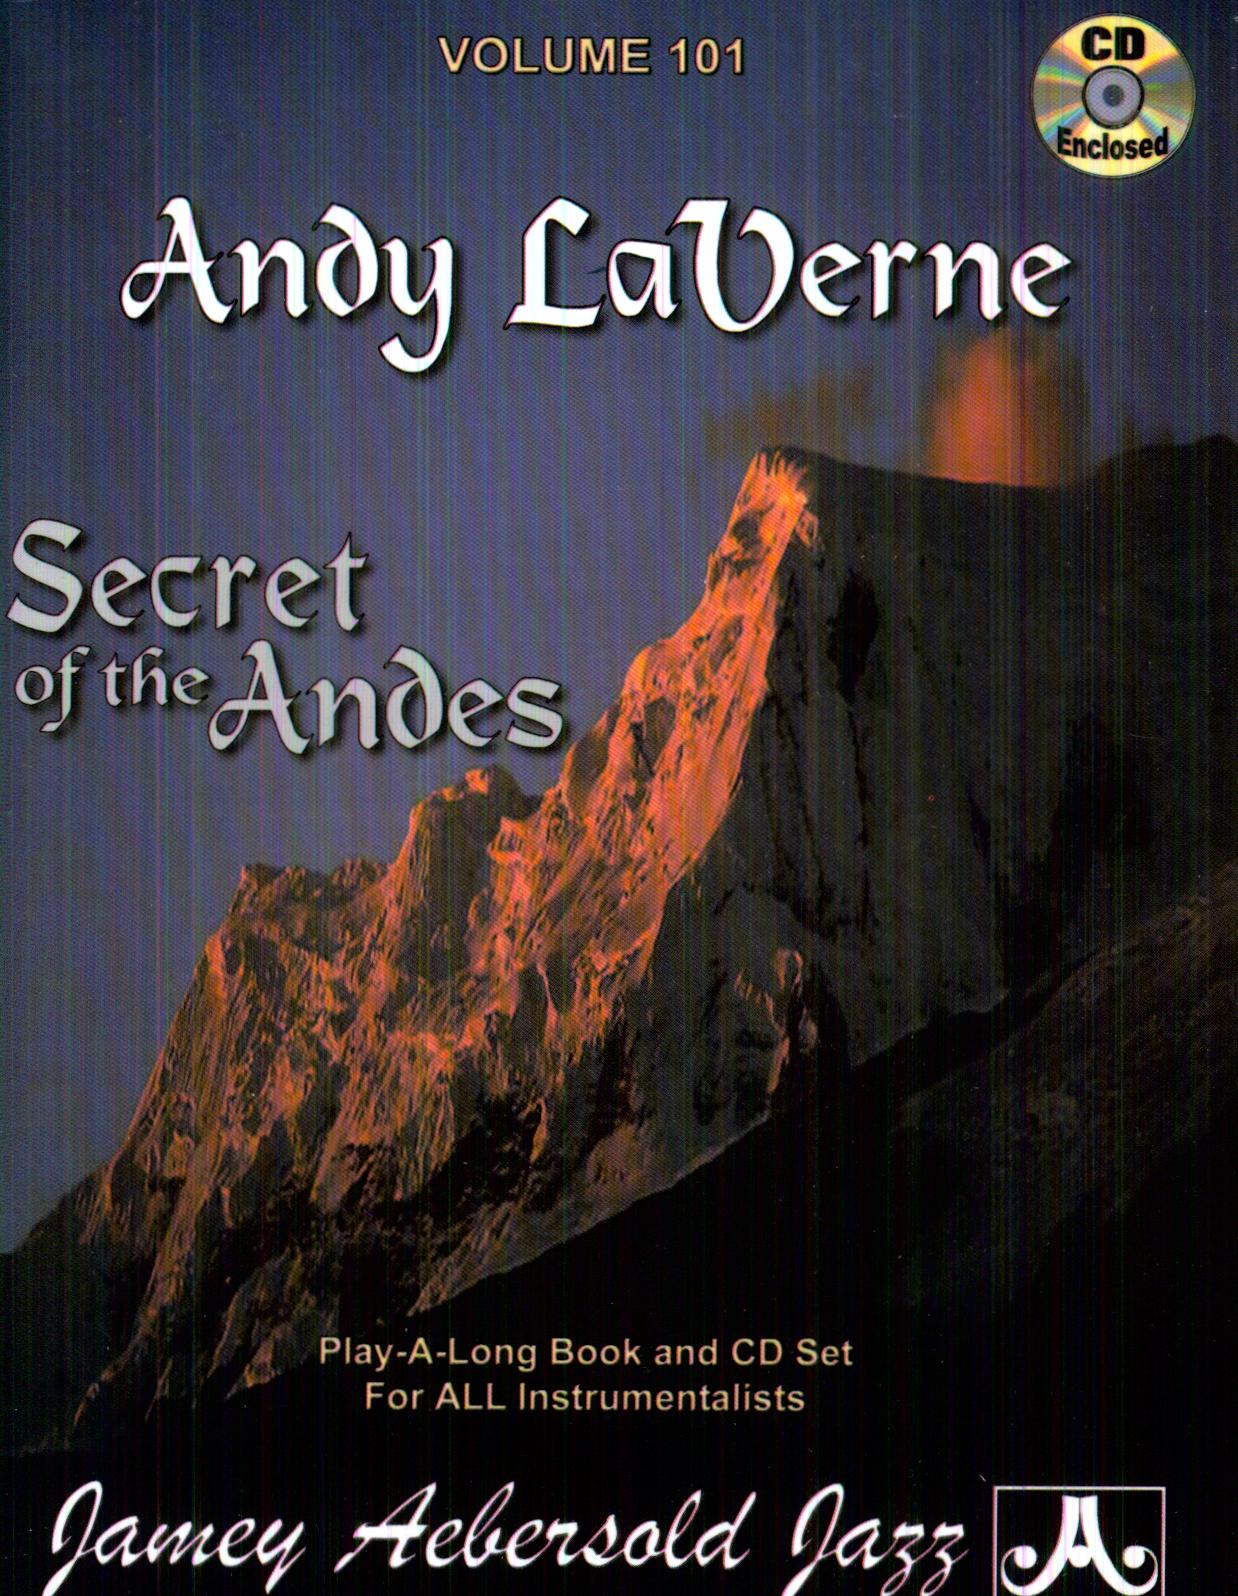 ANDY LAVERNE: SECRET OF THE ANDES